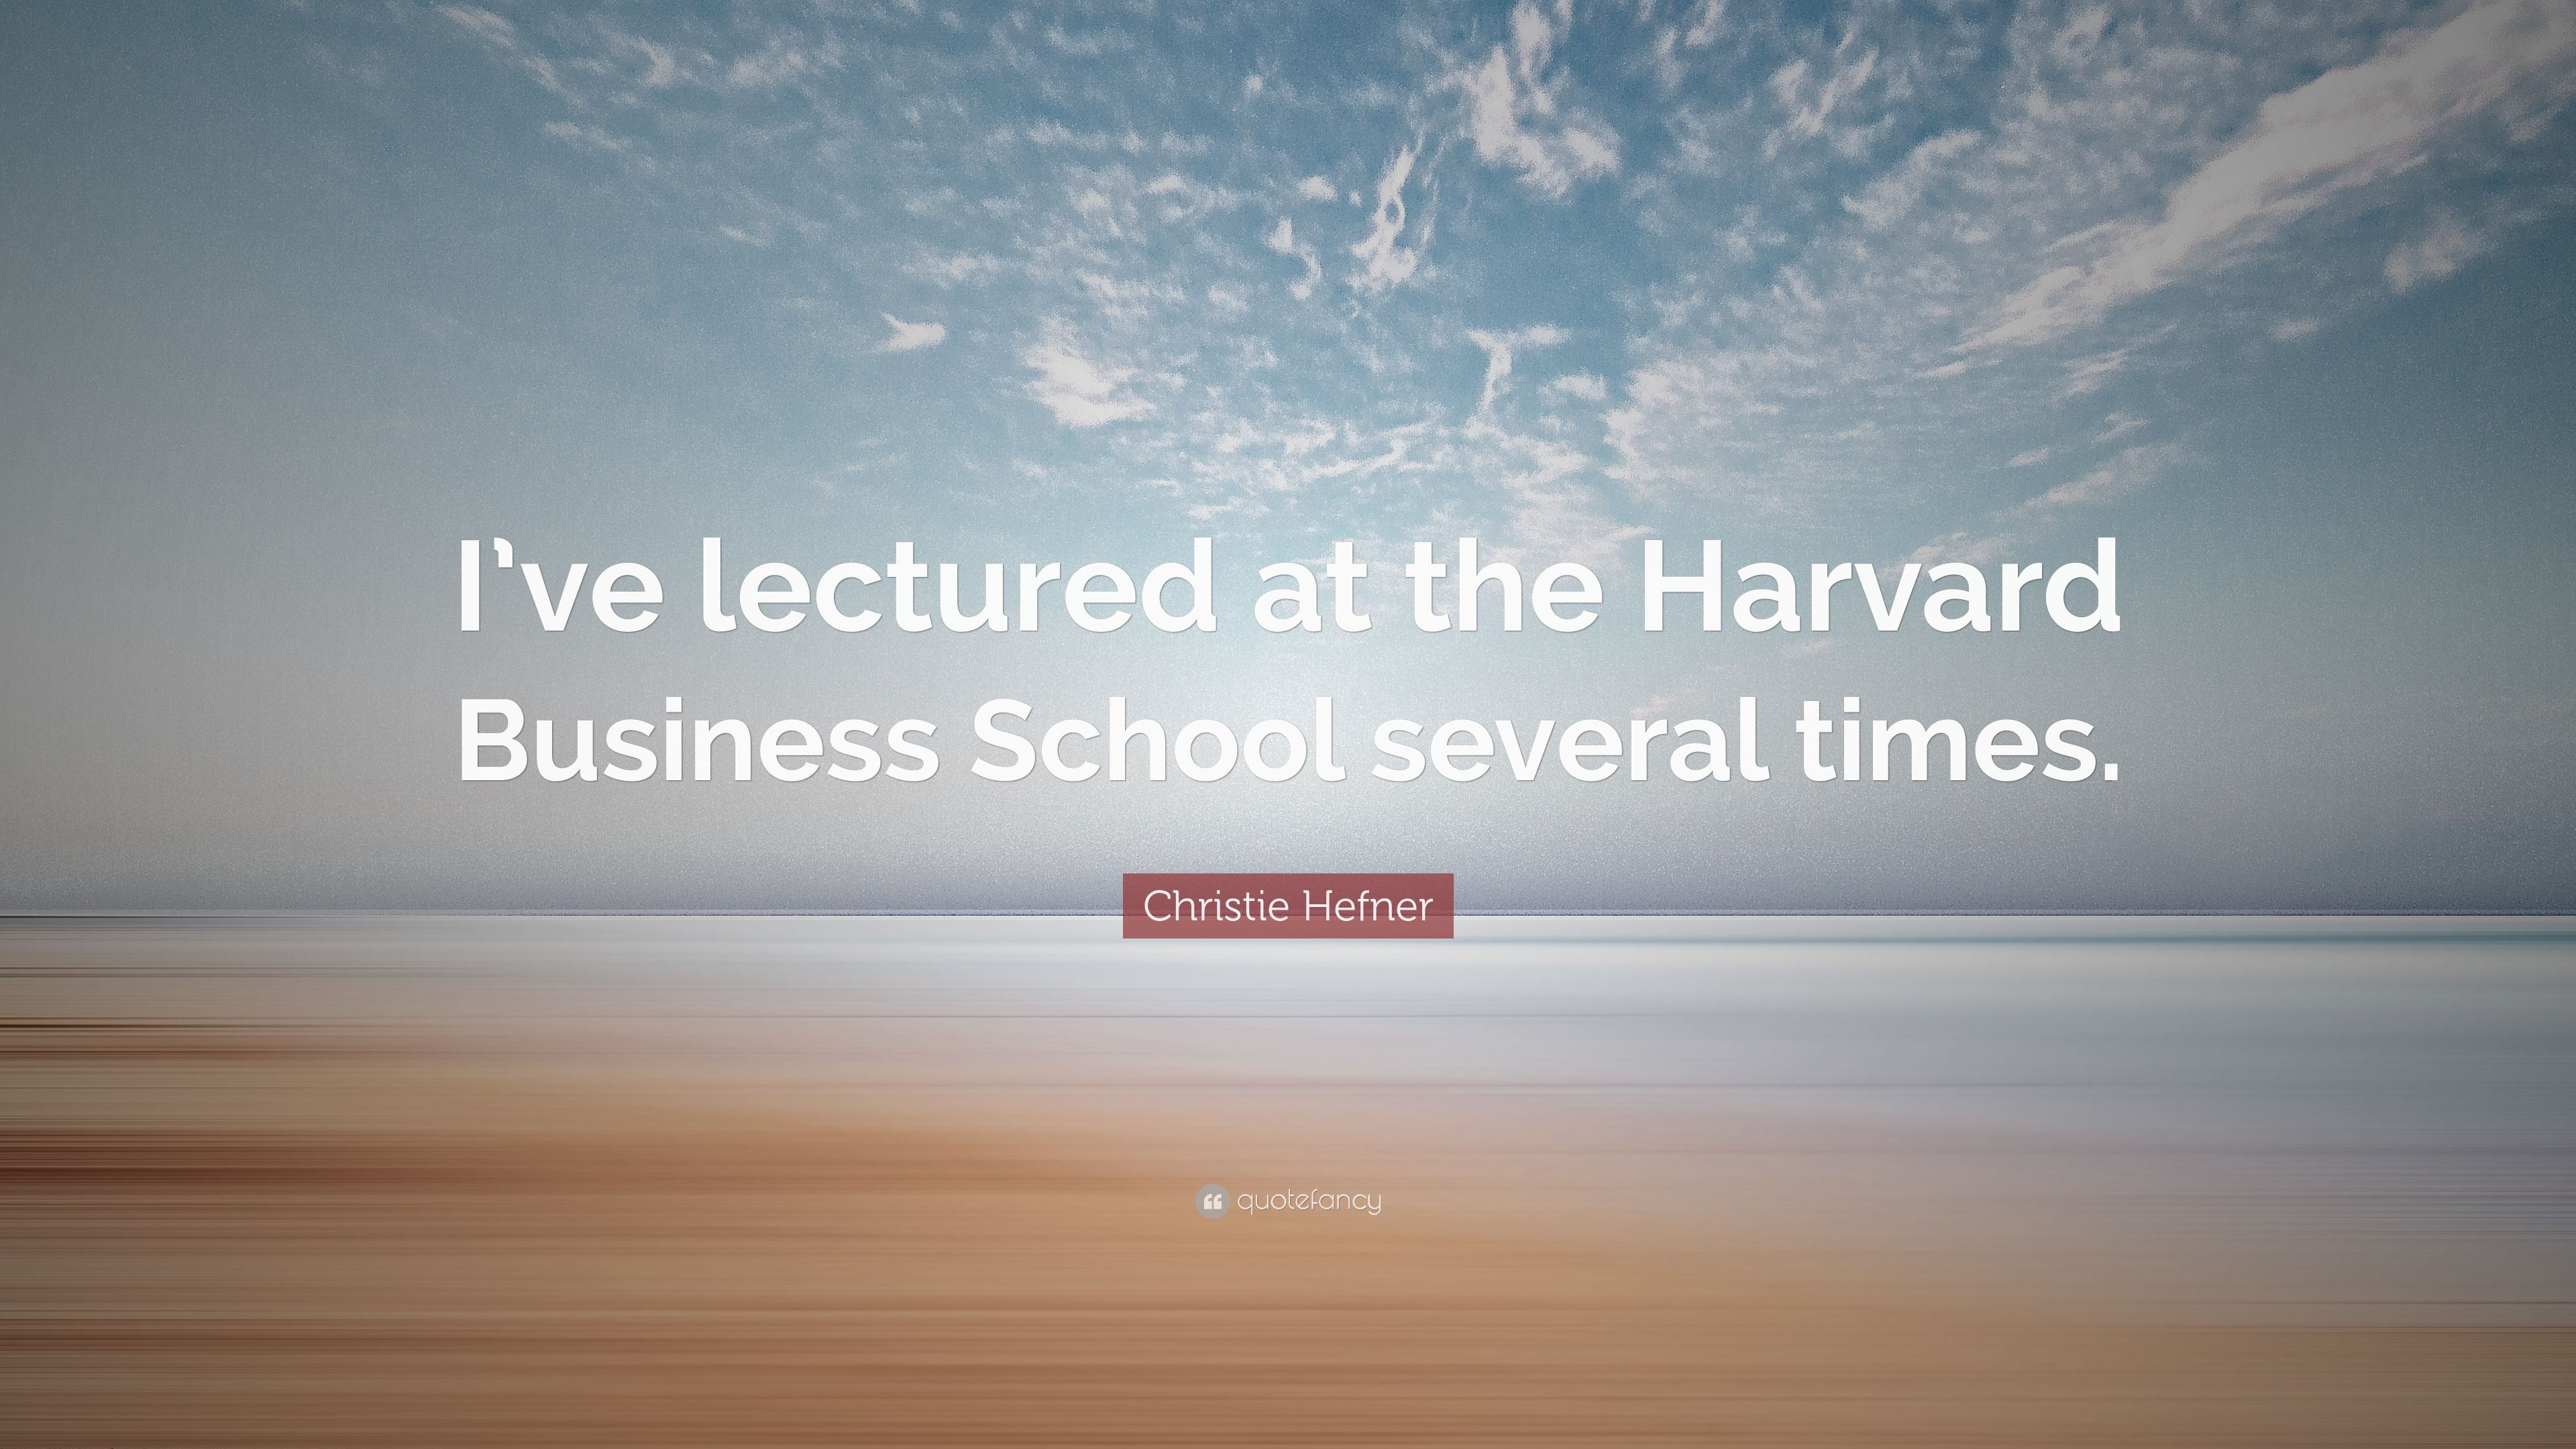 Christie Hefner Quote: “I've lectured at the Harvard Business School several times.” (7 wallpaper)